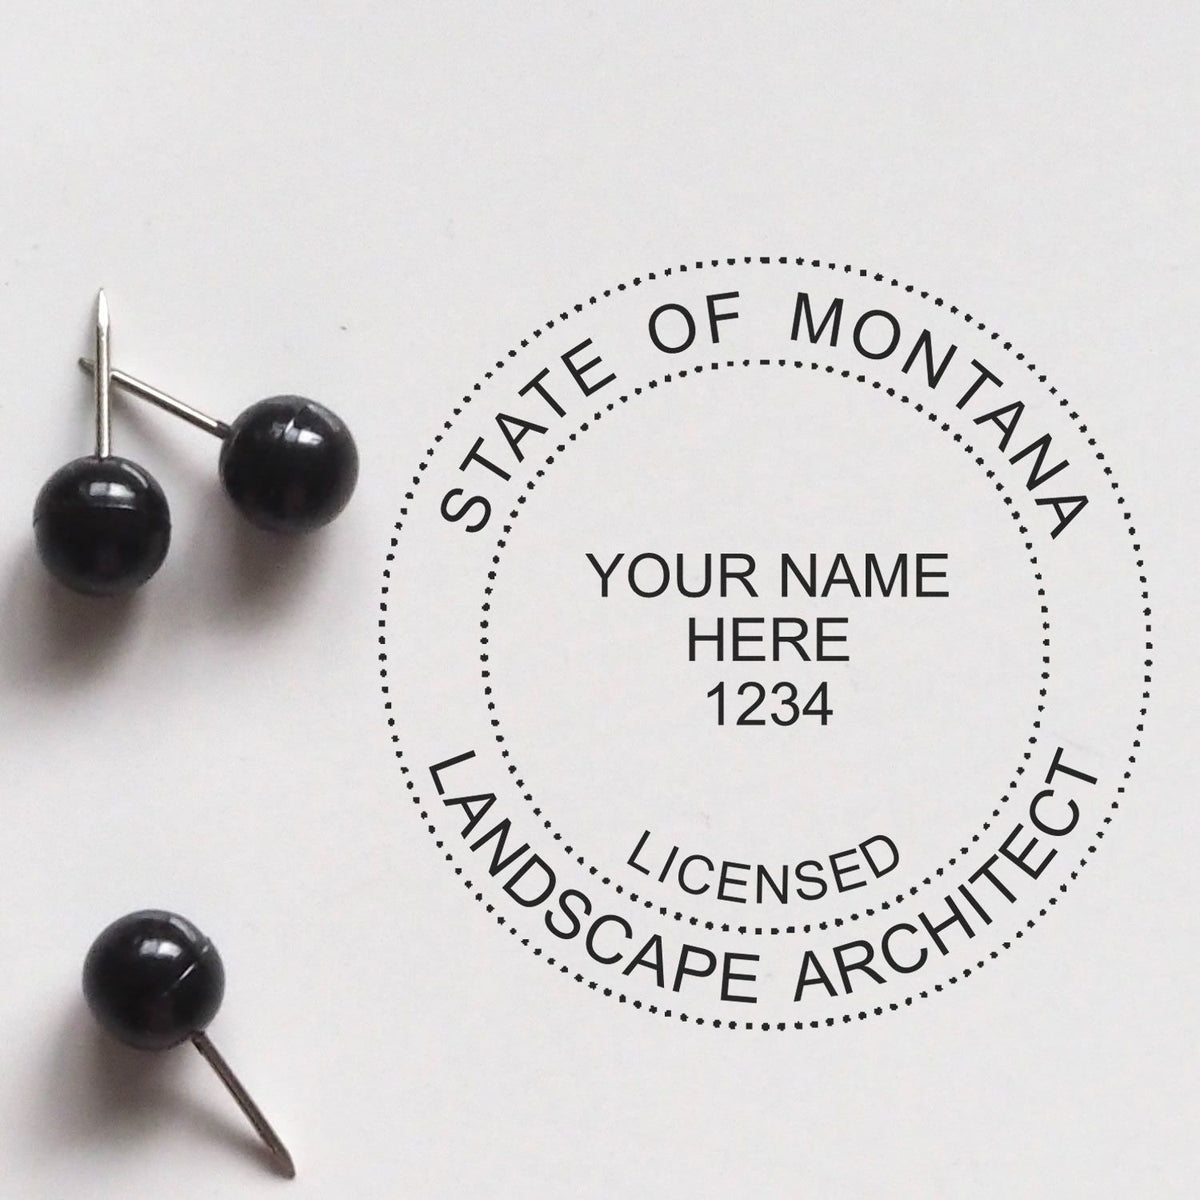 Slim Pre-Inked Montana Landscape Architect Seal Stamp in use photo showing a stamped imprint of the Slim Pre-Inked Montana Landscape Architect Seal Stamp